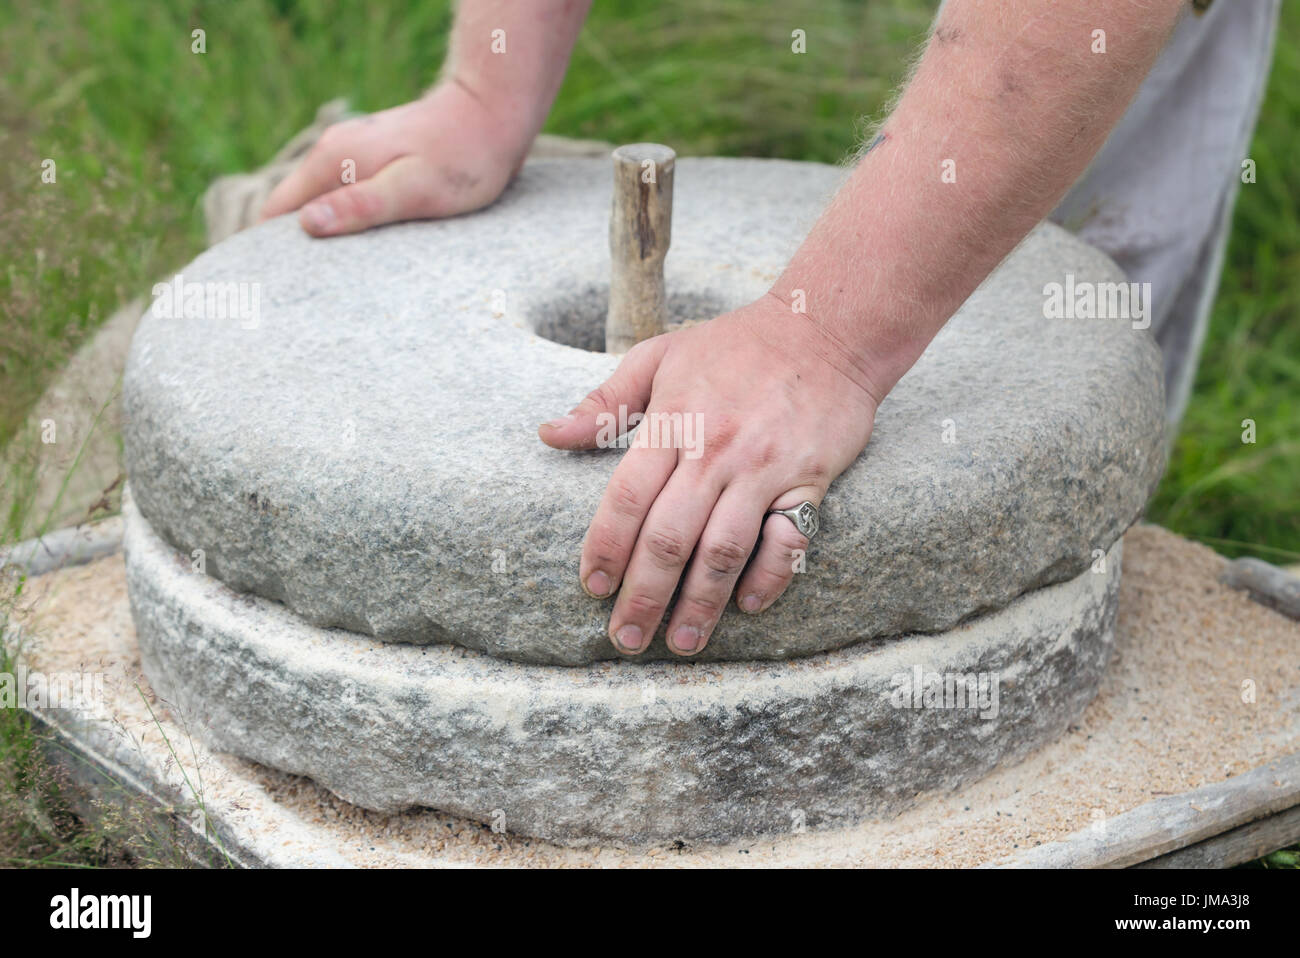 The ancient Quern stone hand mill with grain. The man grinds the grain into flour with the help of a millstone. Men's hands on a millstone. Old grindi Stock Photo